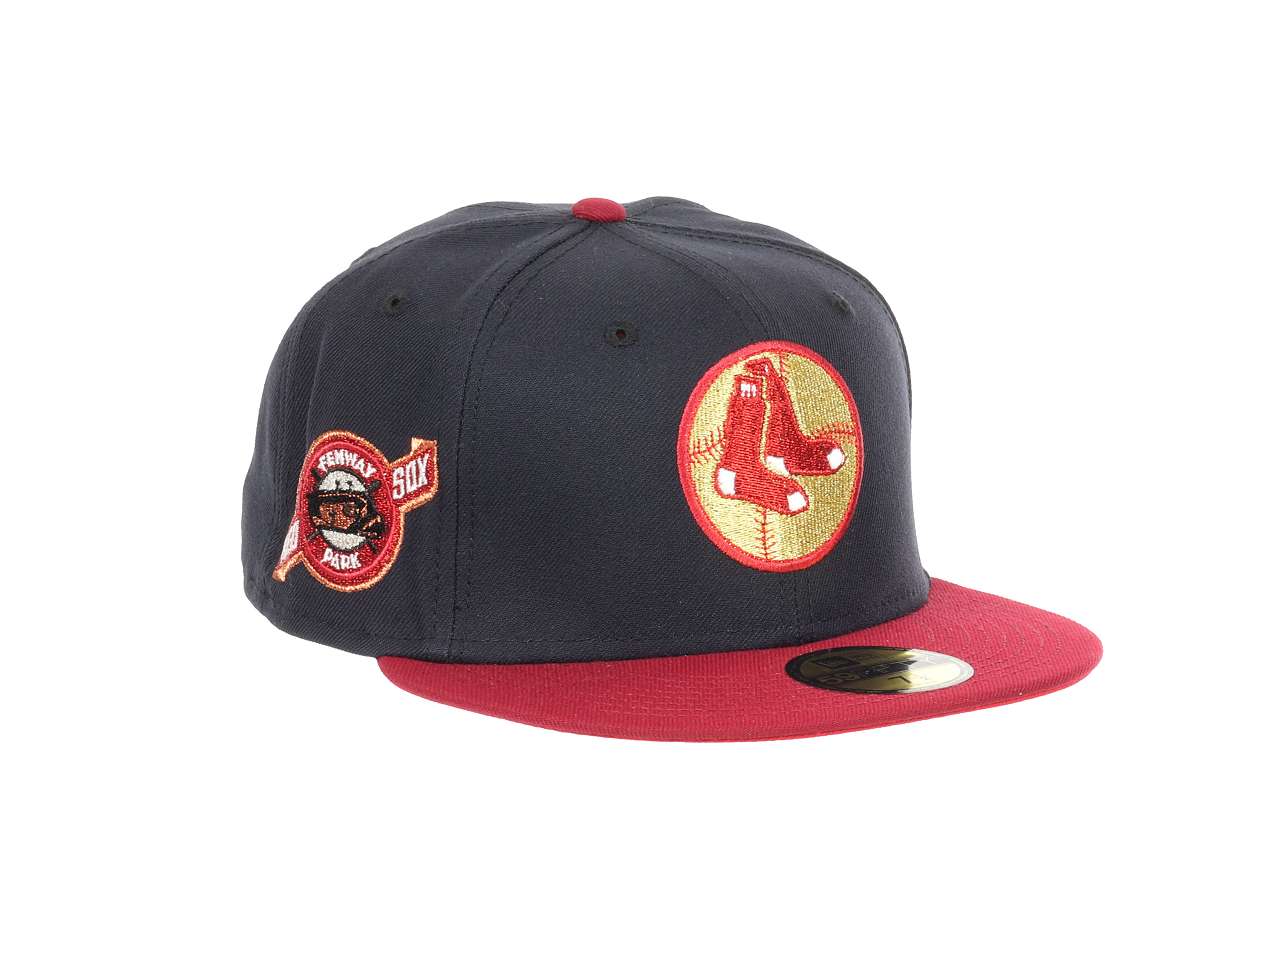 Boston Red Sox MLB Cooperstown Fenway Park Sidepatch Navy Cardinal 59Fifty Basecap New Era